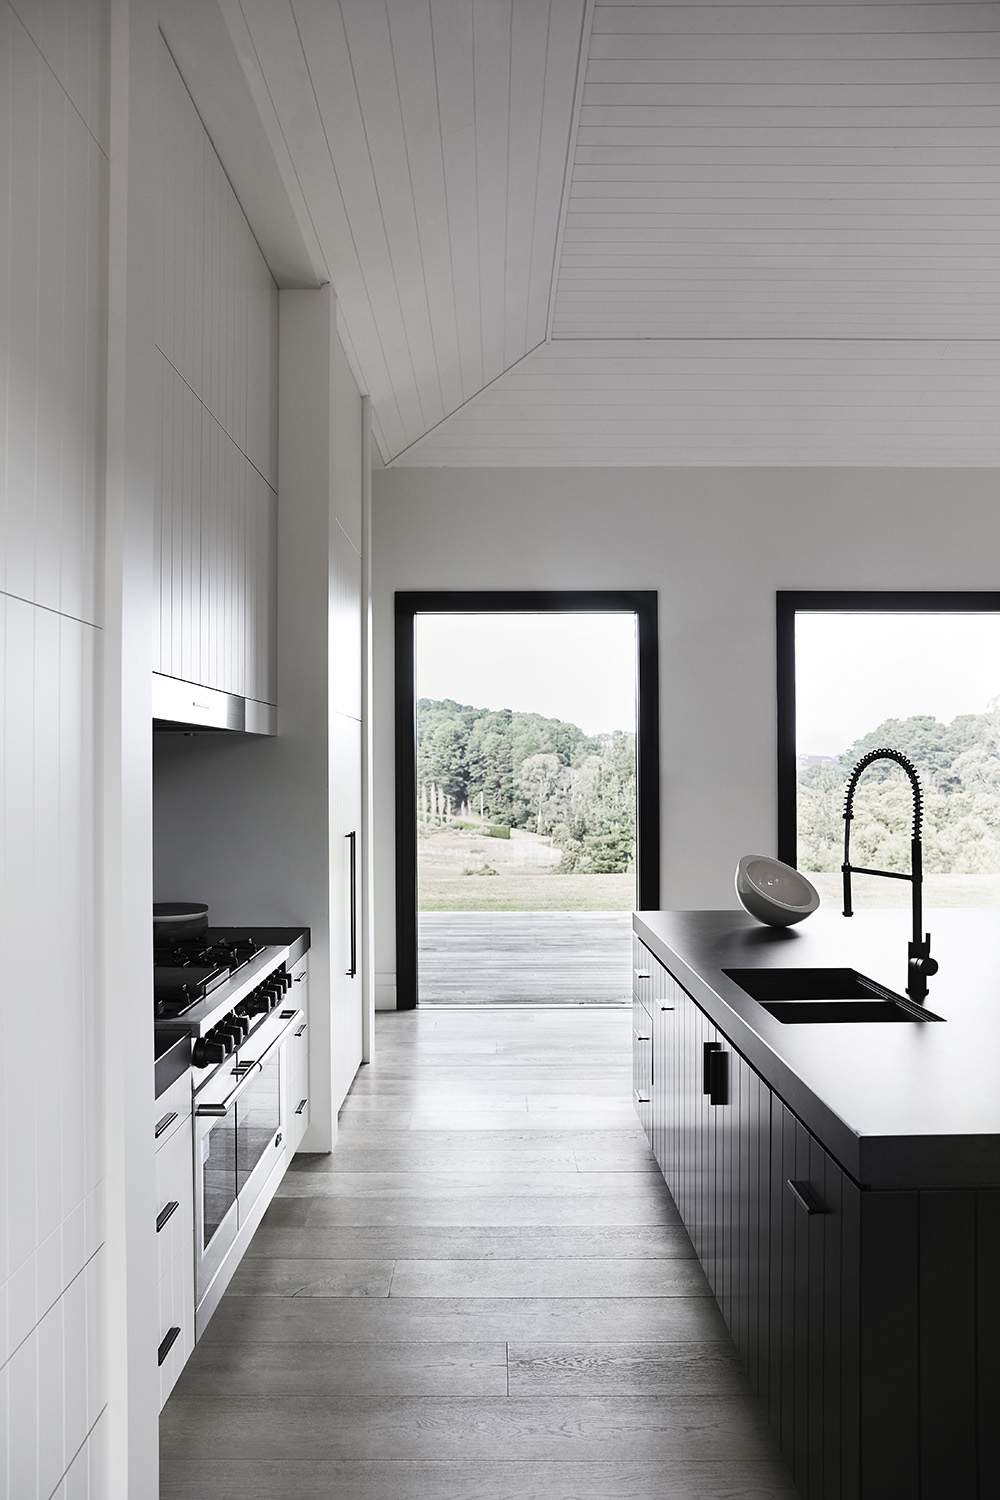 In this modern kitchen, there's minimalist white cabinets with integrated appliances, as well as a large black island that measures in at almost 10 feet (3m), and includes a black stone countertop that overhangs to provide room for seating.